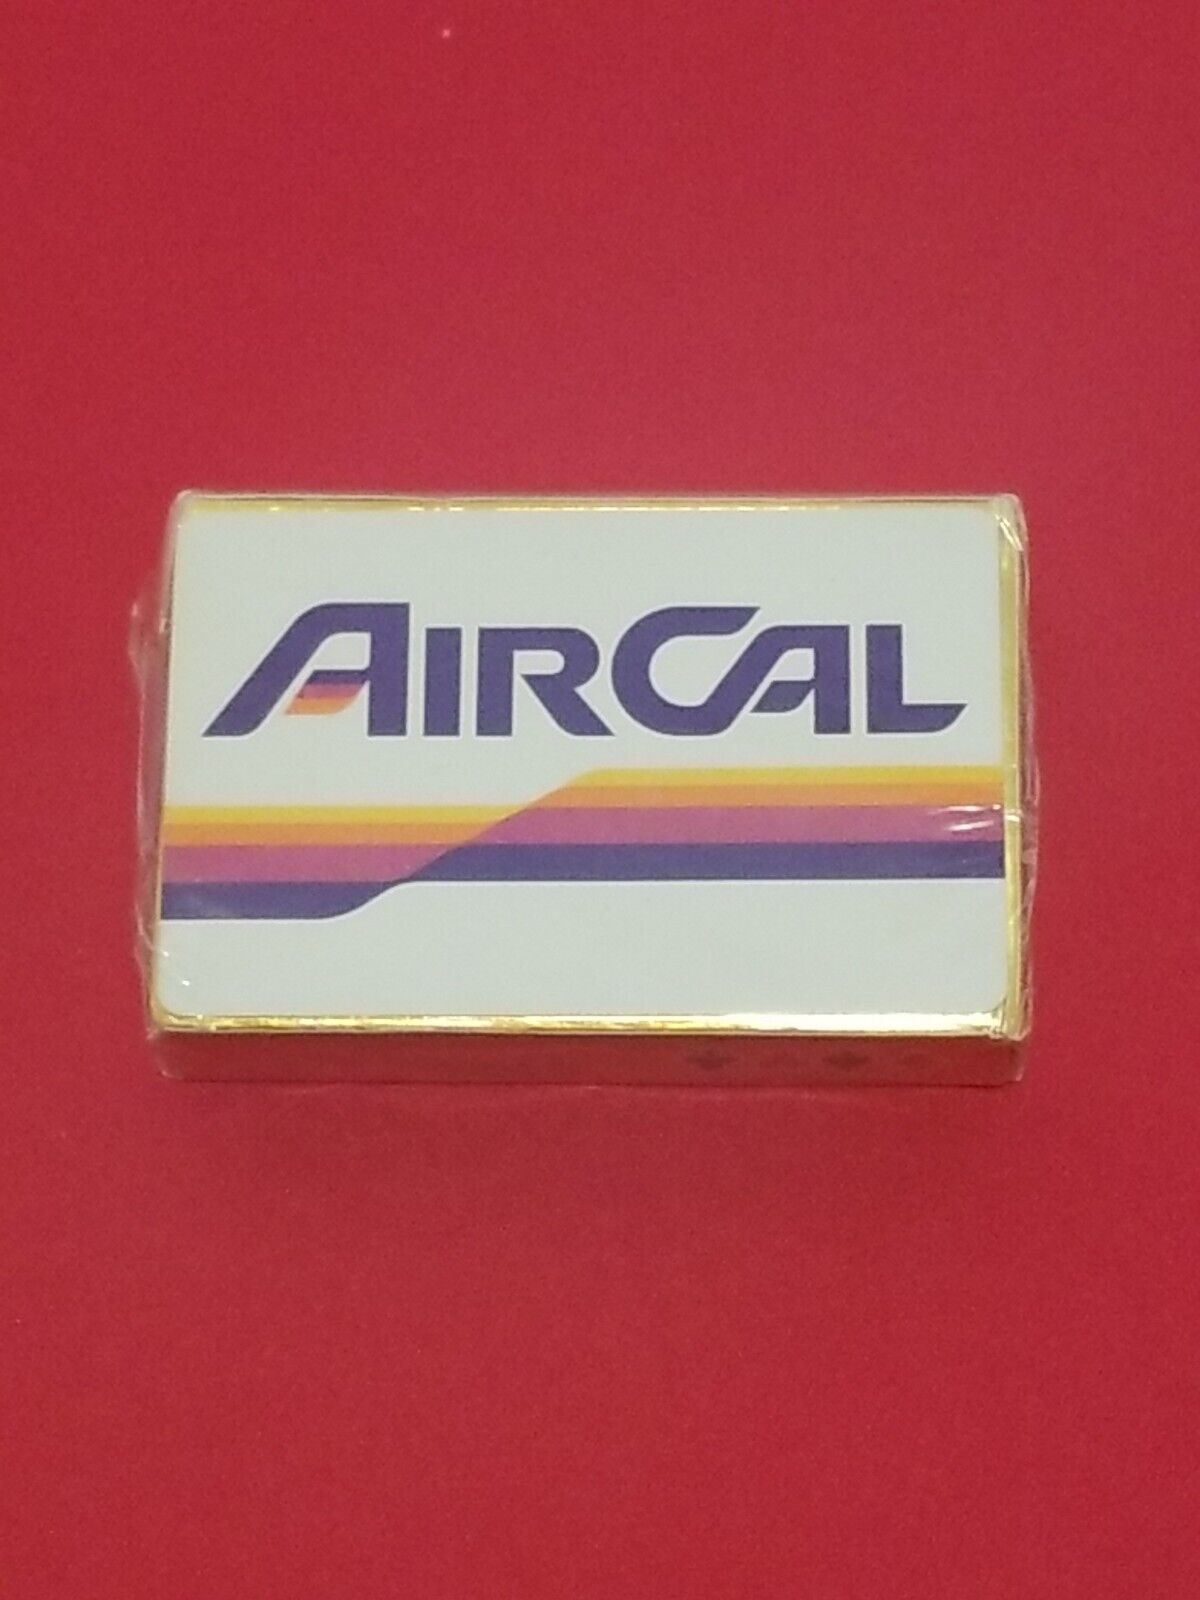 Vintage AirCal Playing Card Deck Factory Sealed VTG Defunct Airline Memorabilia Без бренда